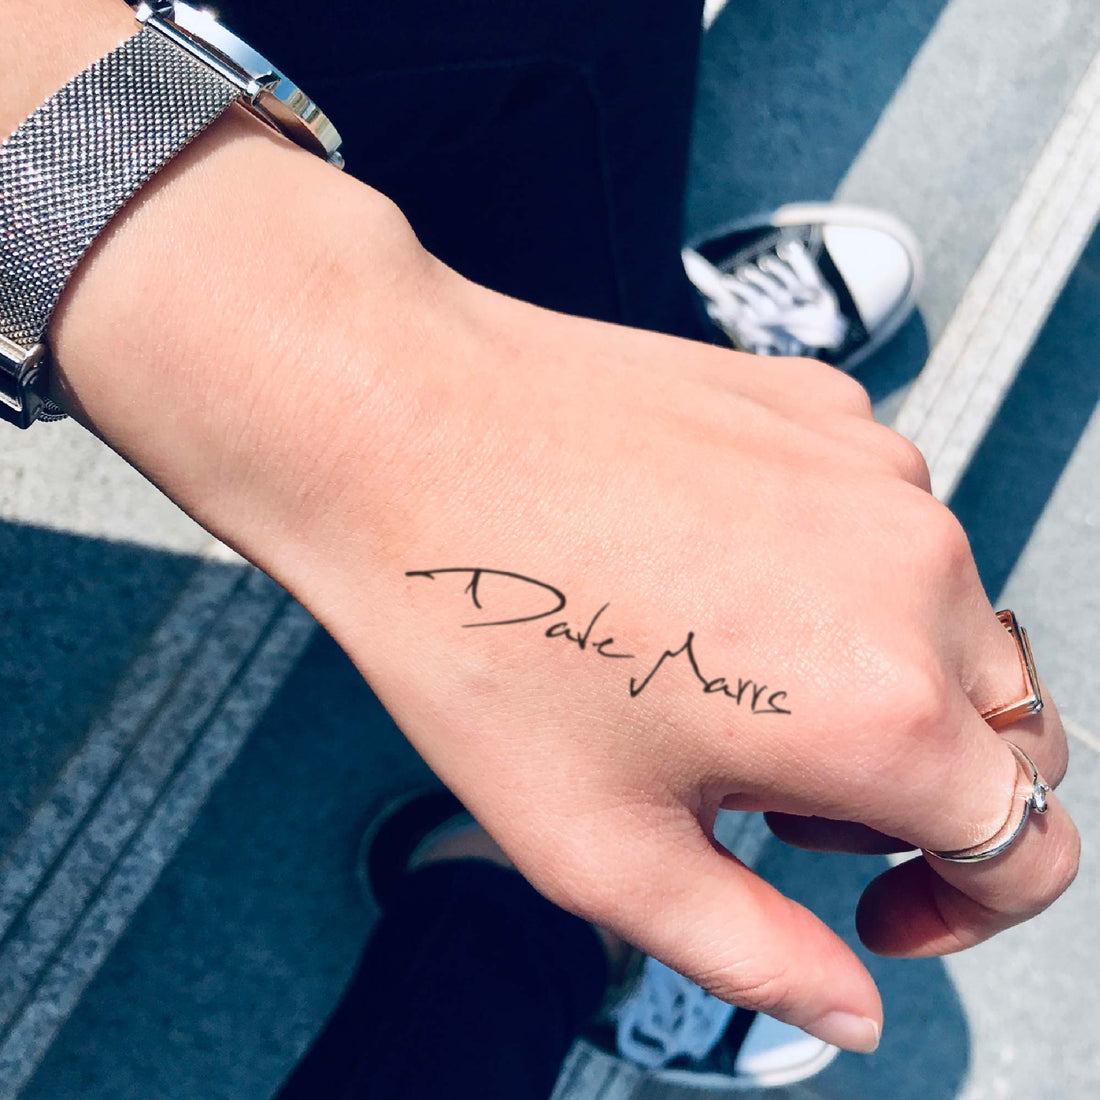 Dave Marrs custom temporary tattoo sticker design idea inspiration meanings removal arm wrist hand words font name signature calligraphy lyrics tour concert outfits merch accessory gift souvenir costumes wear dress up code